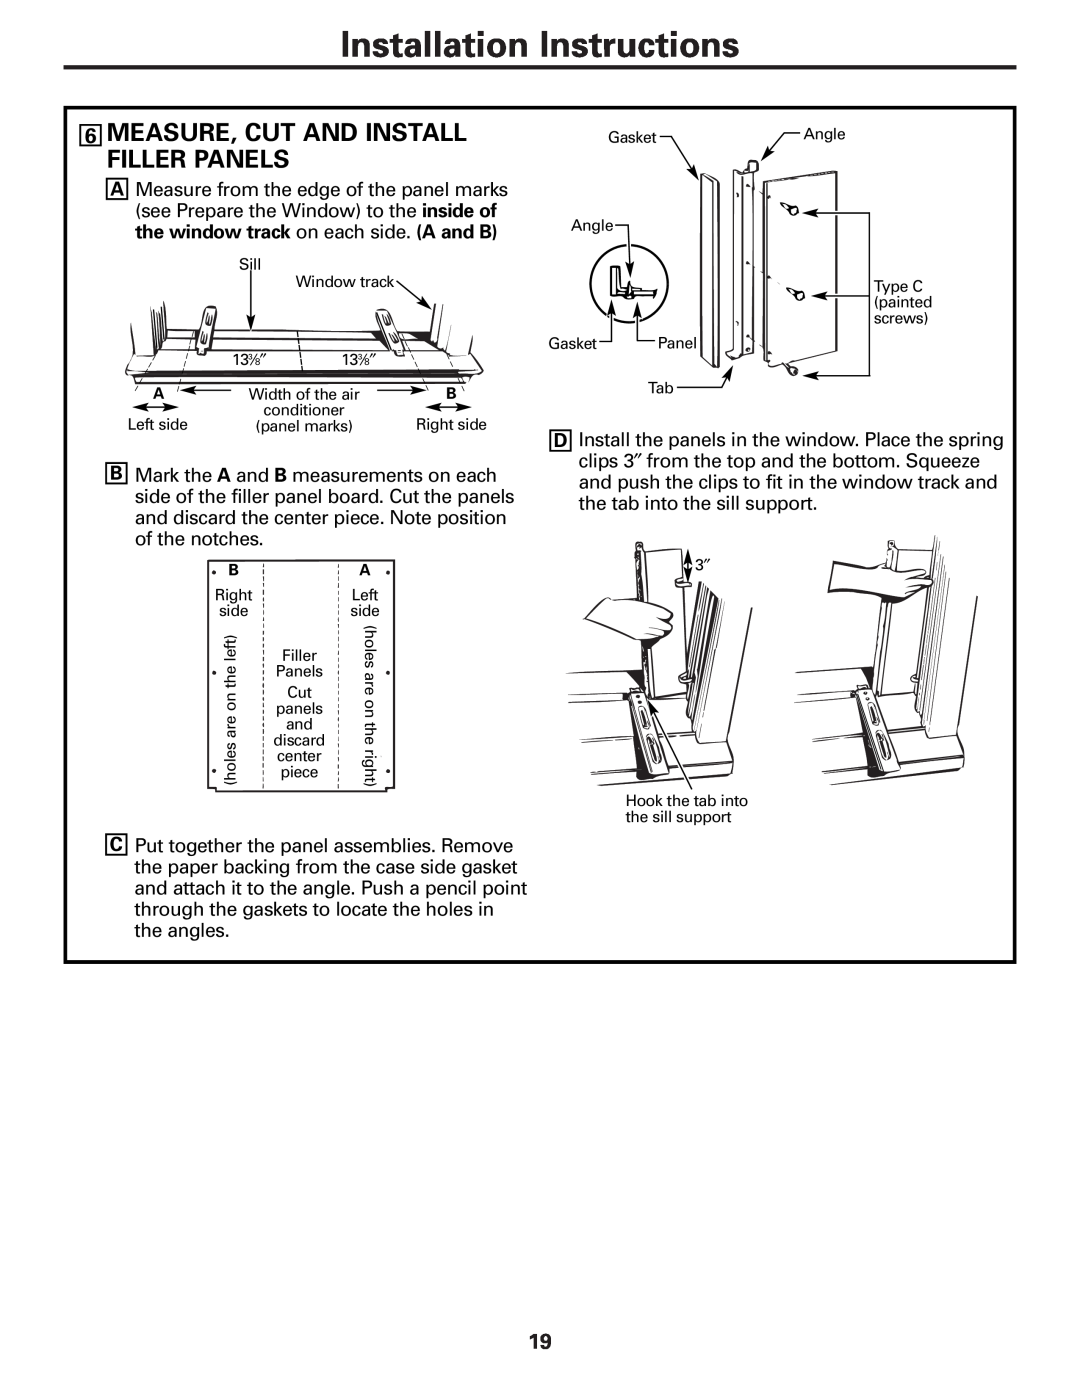 GE Cool Only installation instructions 6MEASURE, CUT AND INSTALL FILLER PANELS, Installation Instructions 